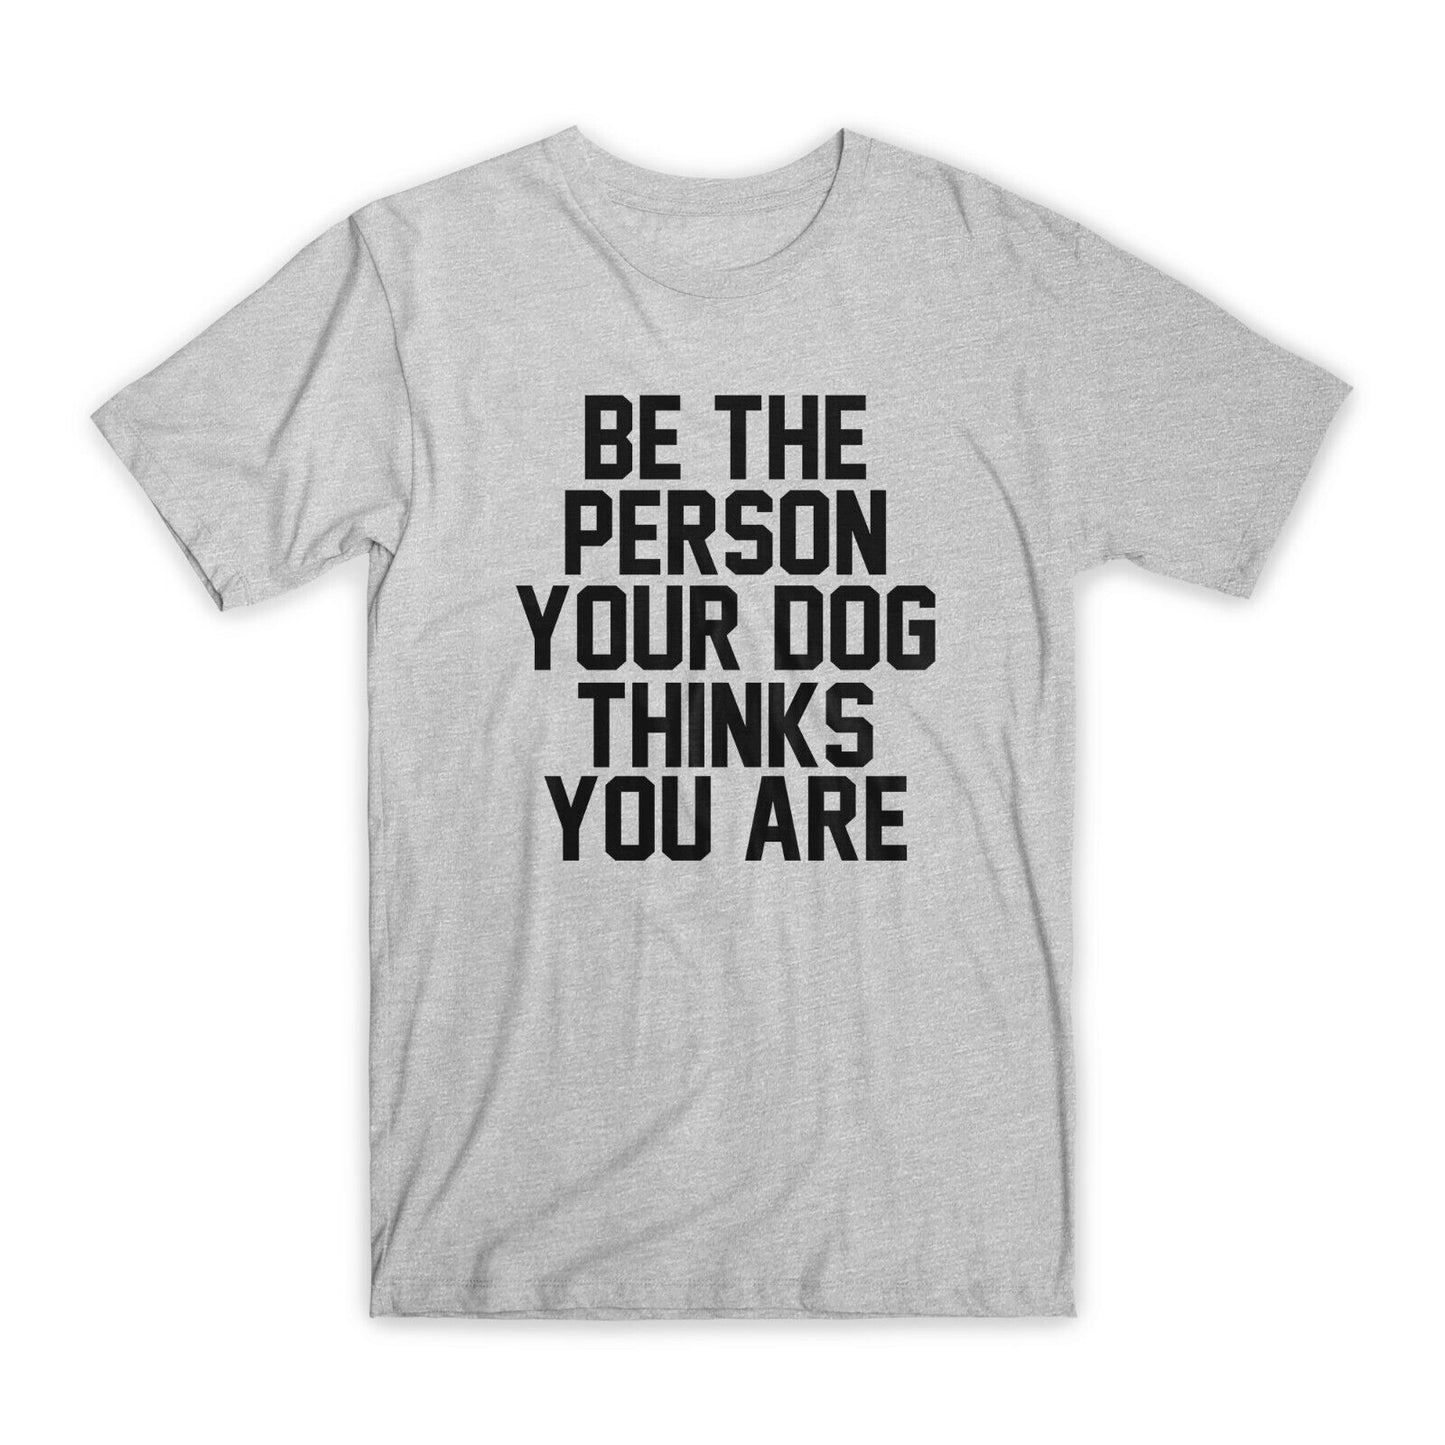 Be The Person Your Dog Thinks You Are T-Shirt Premium Cotton Funny Tees Gift NEW